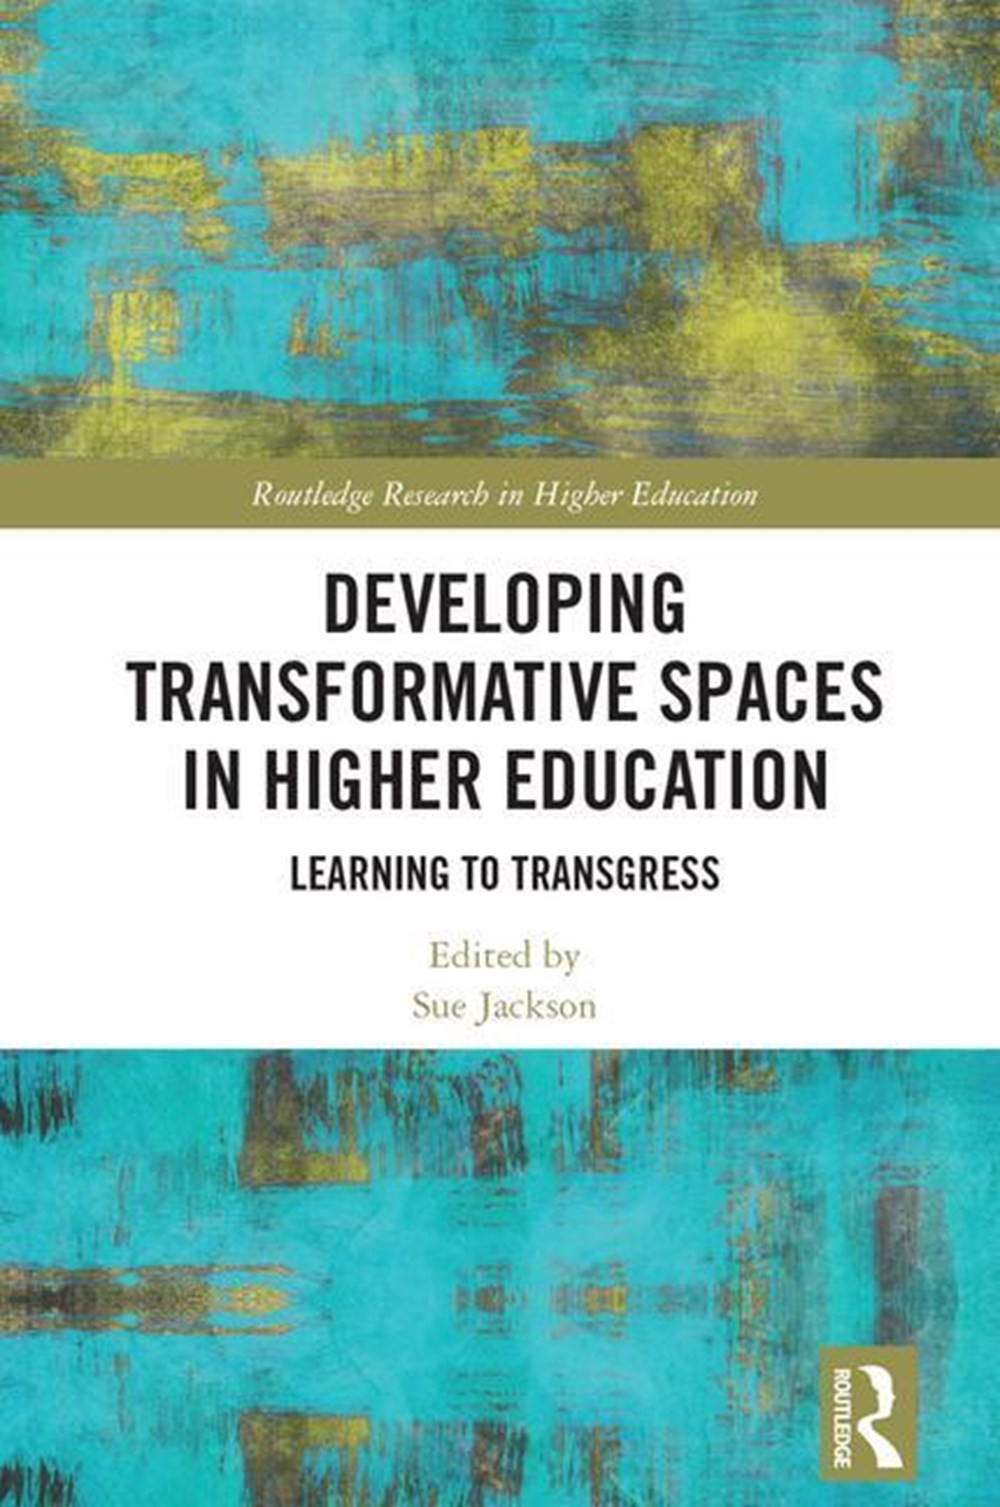 Developing Transformative Spaces in Higher Education Learning to Transgress